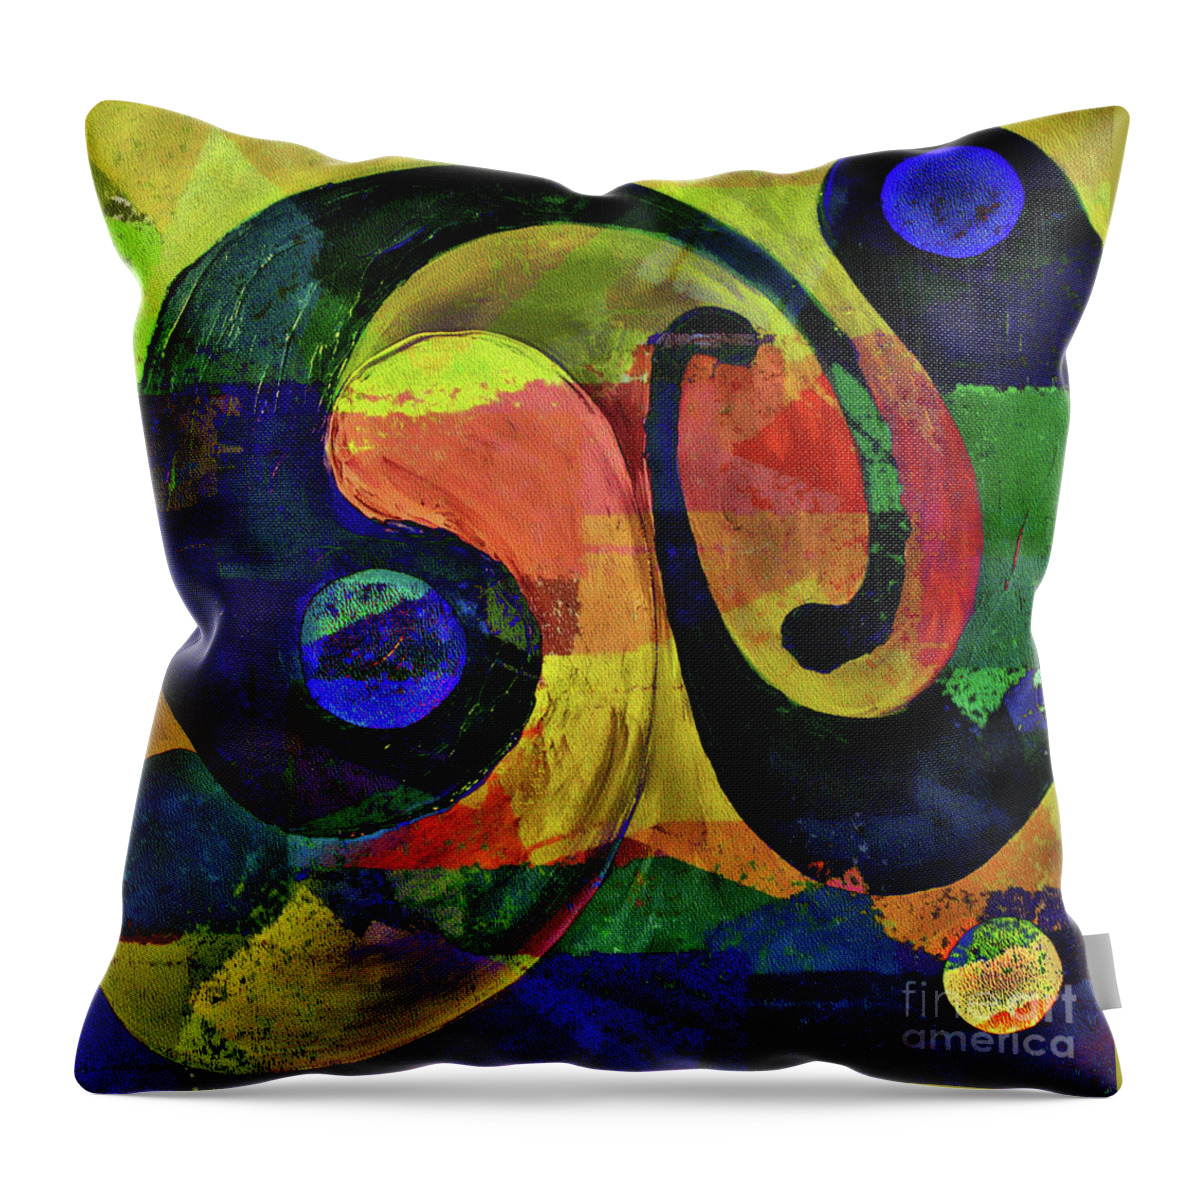 Abstract Throw Pillow featuring the painting Piece by piece by Jolanta Anna Karolska